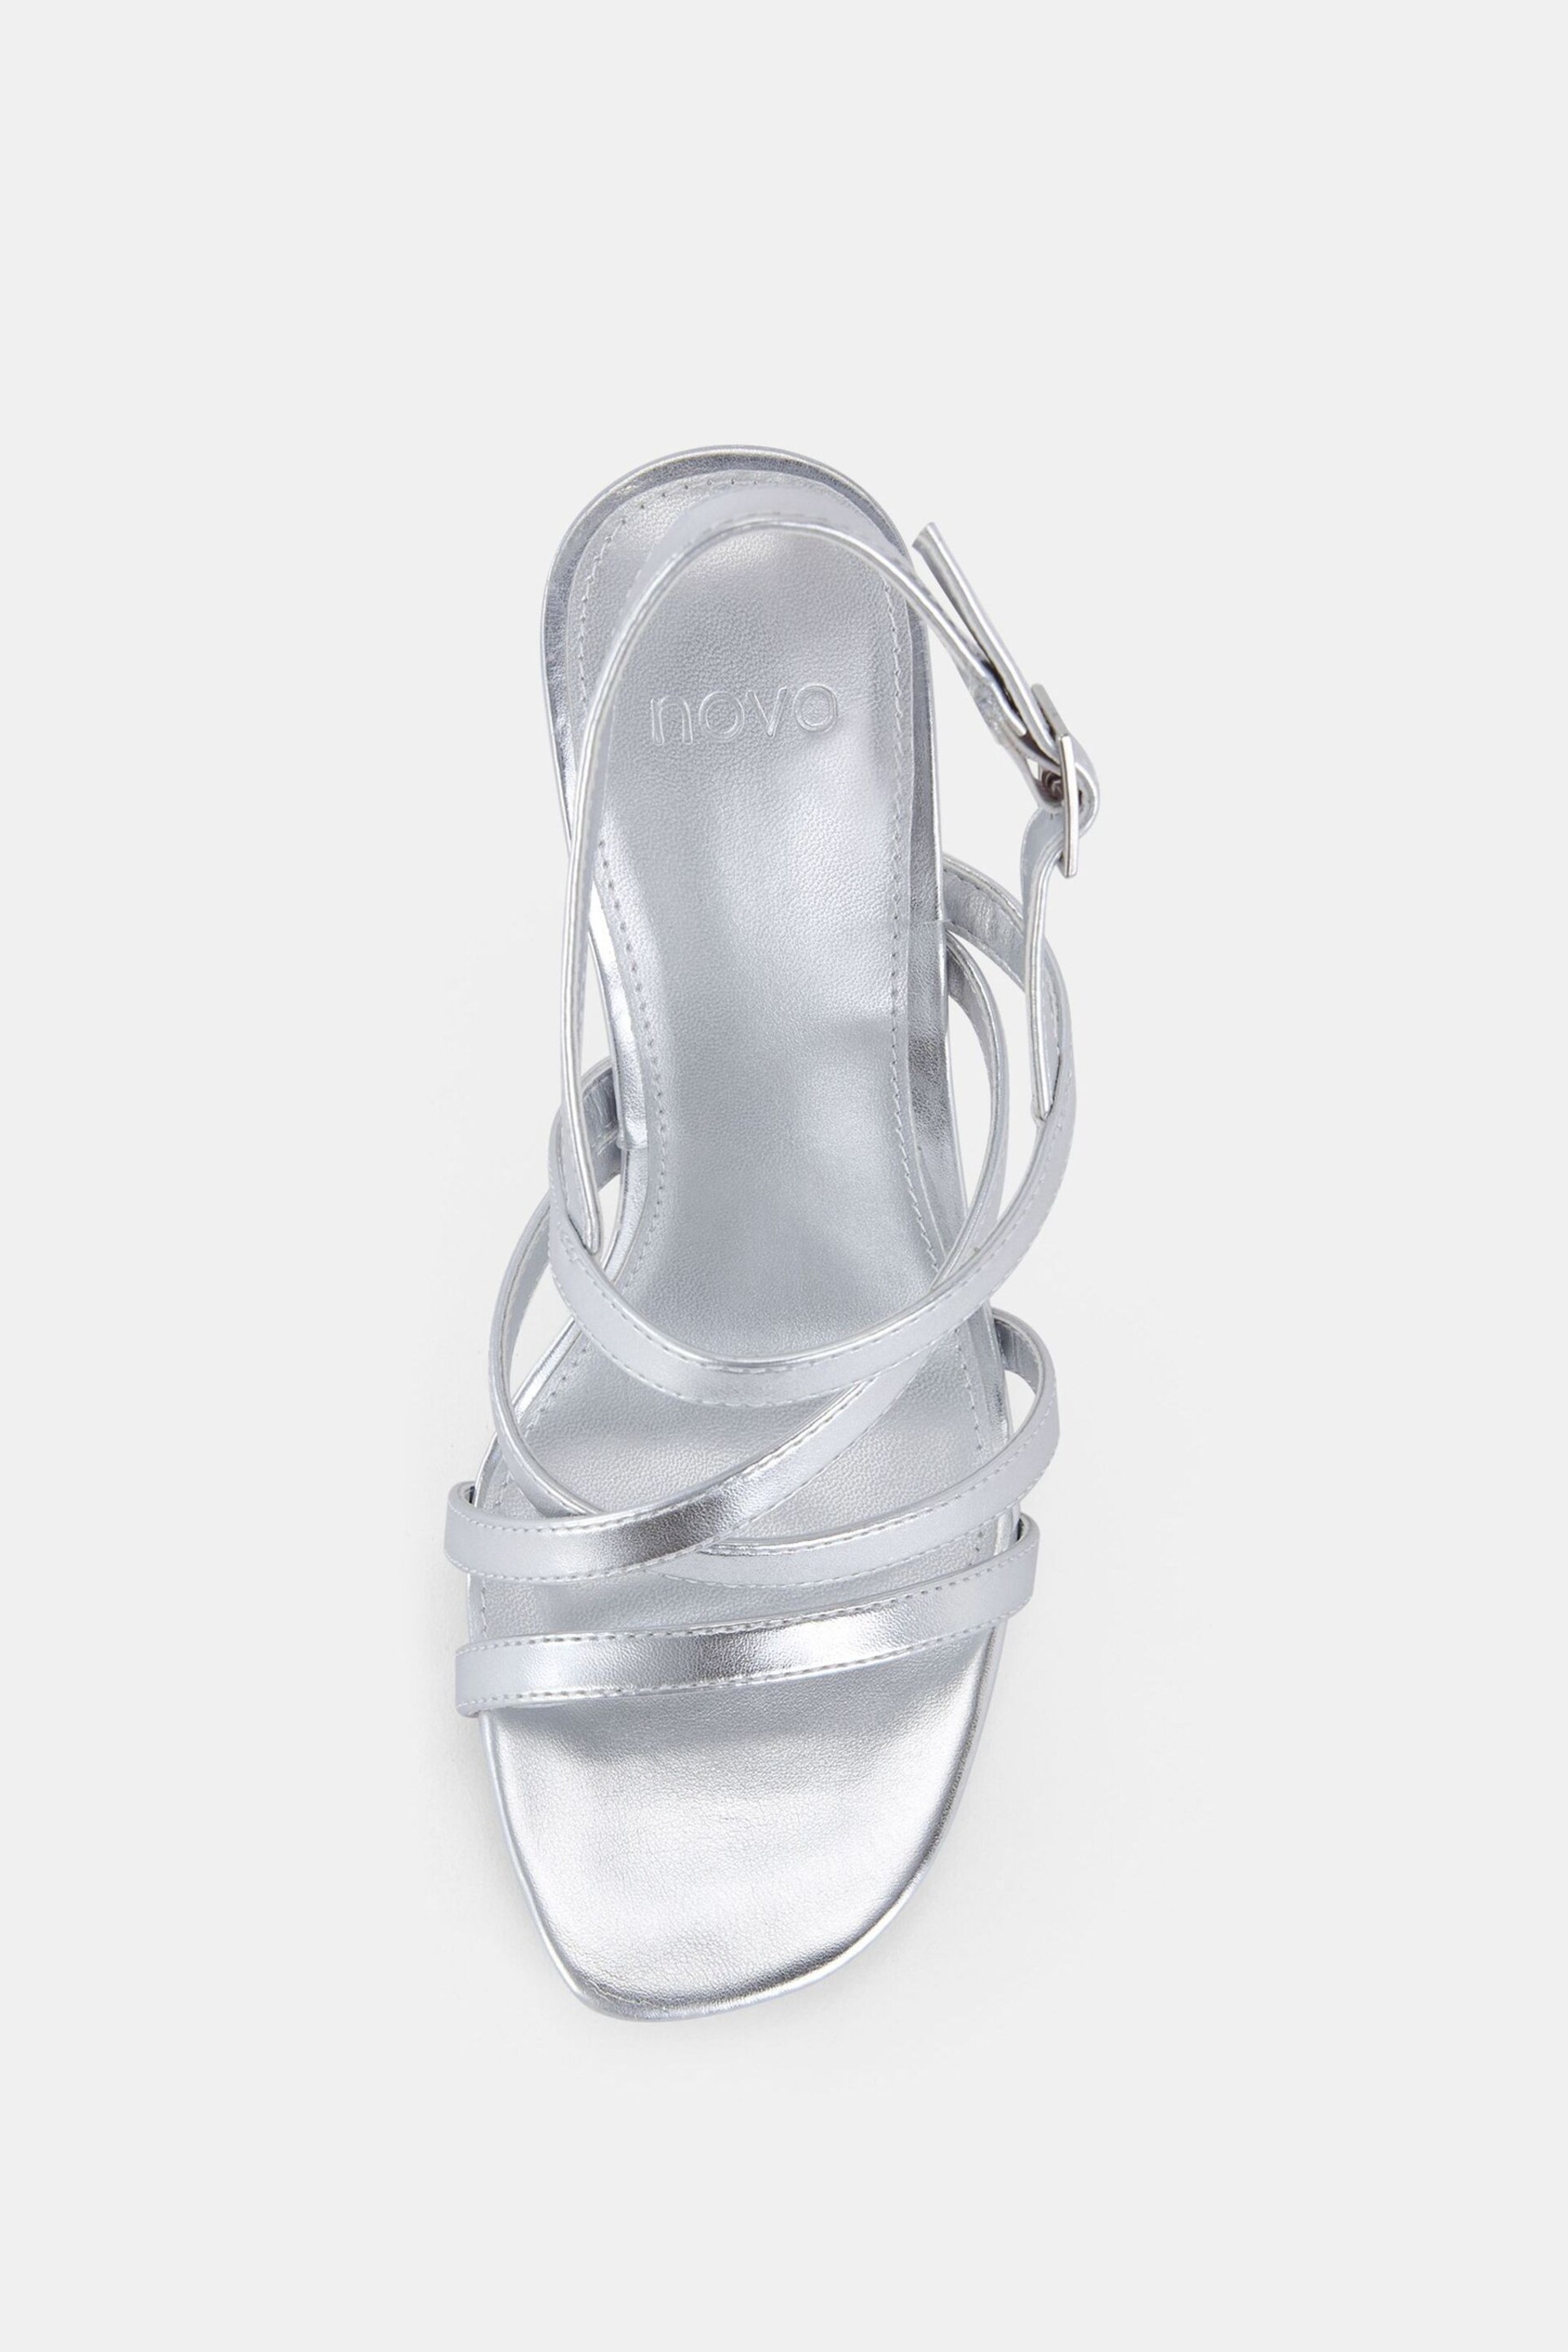 Novo Silver Wide Fit Mimosa Strappy Block Heels - Image 5 of 6